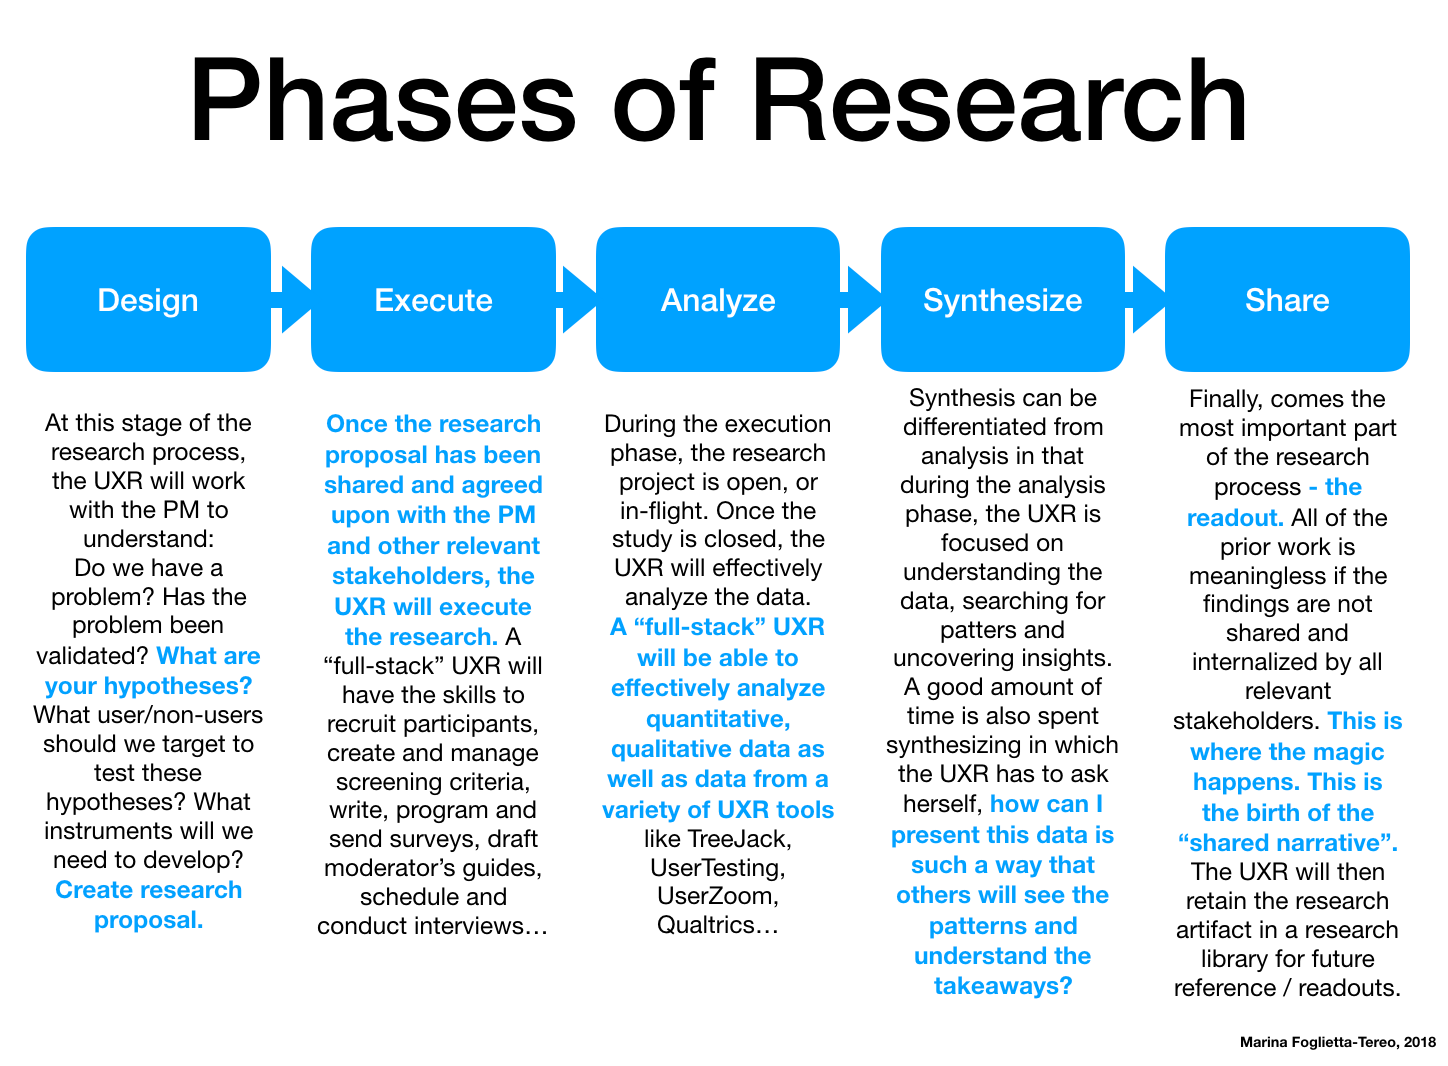 importance of research proposal in research process